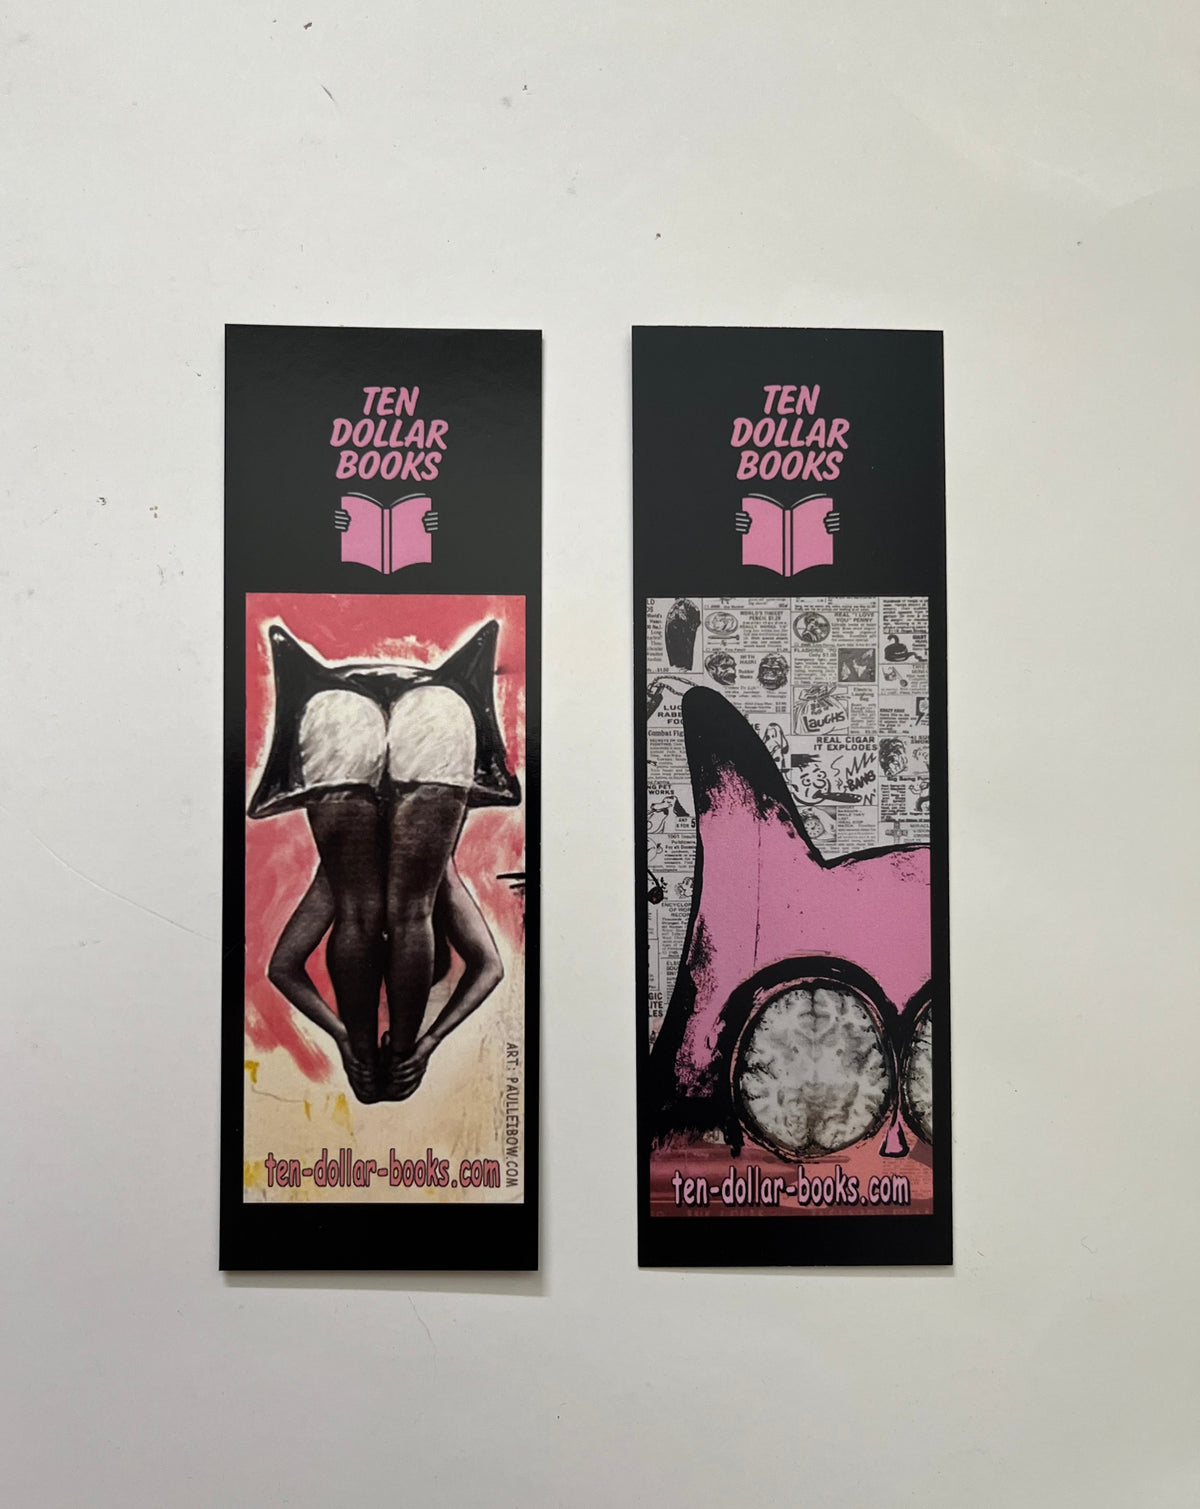 Bookmarks with art by Paul Leibow